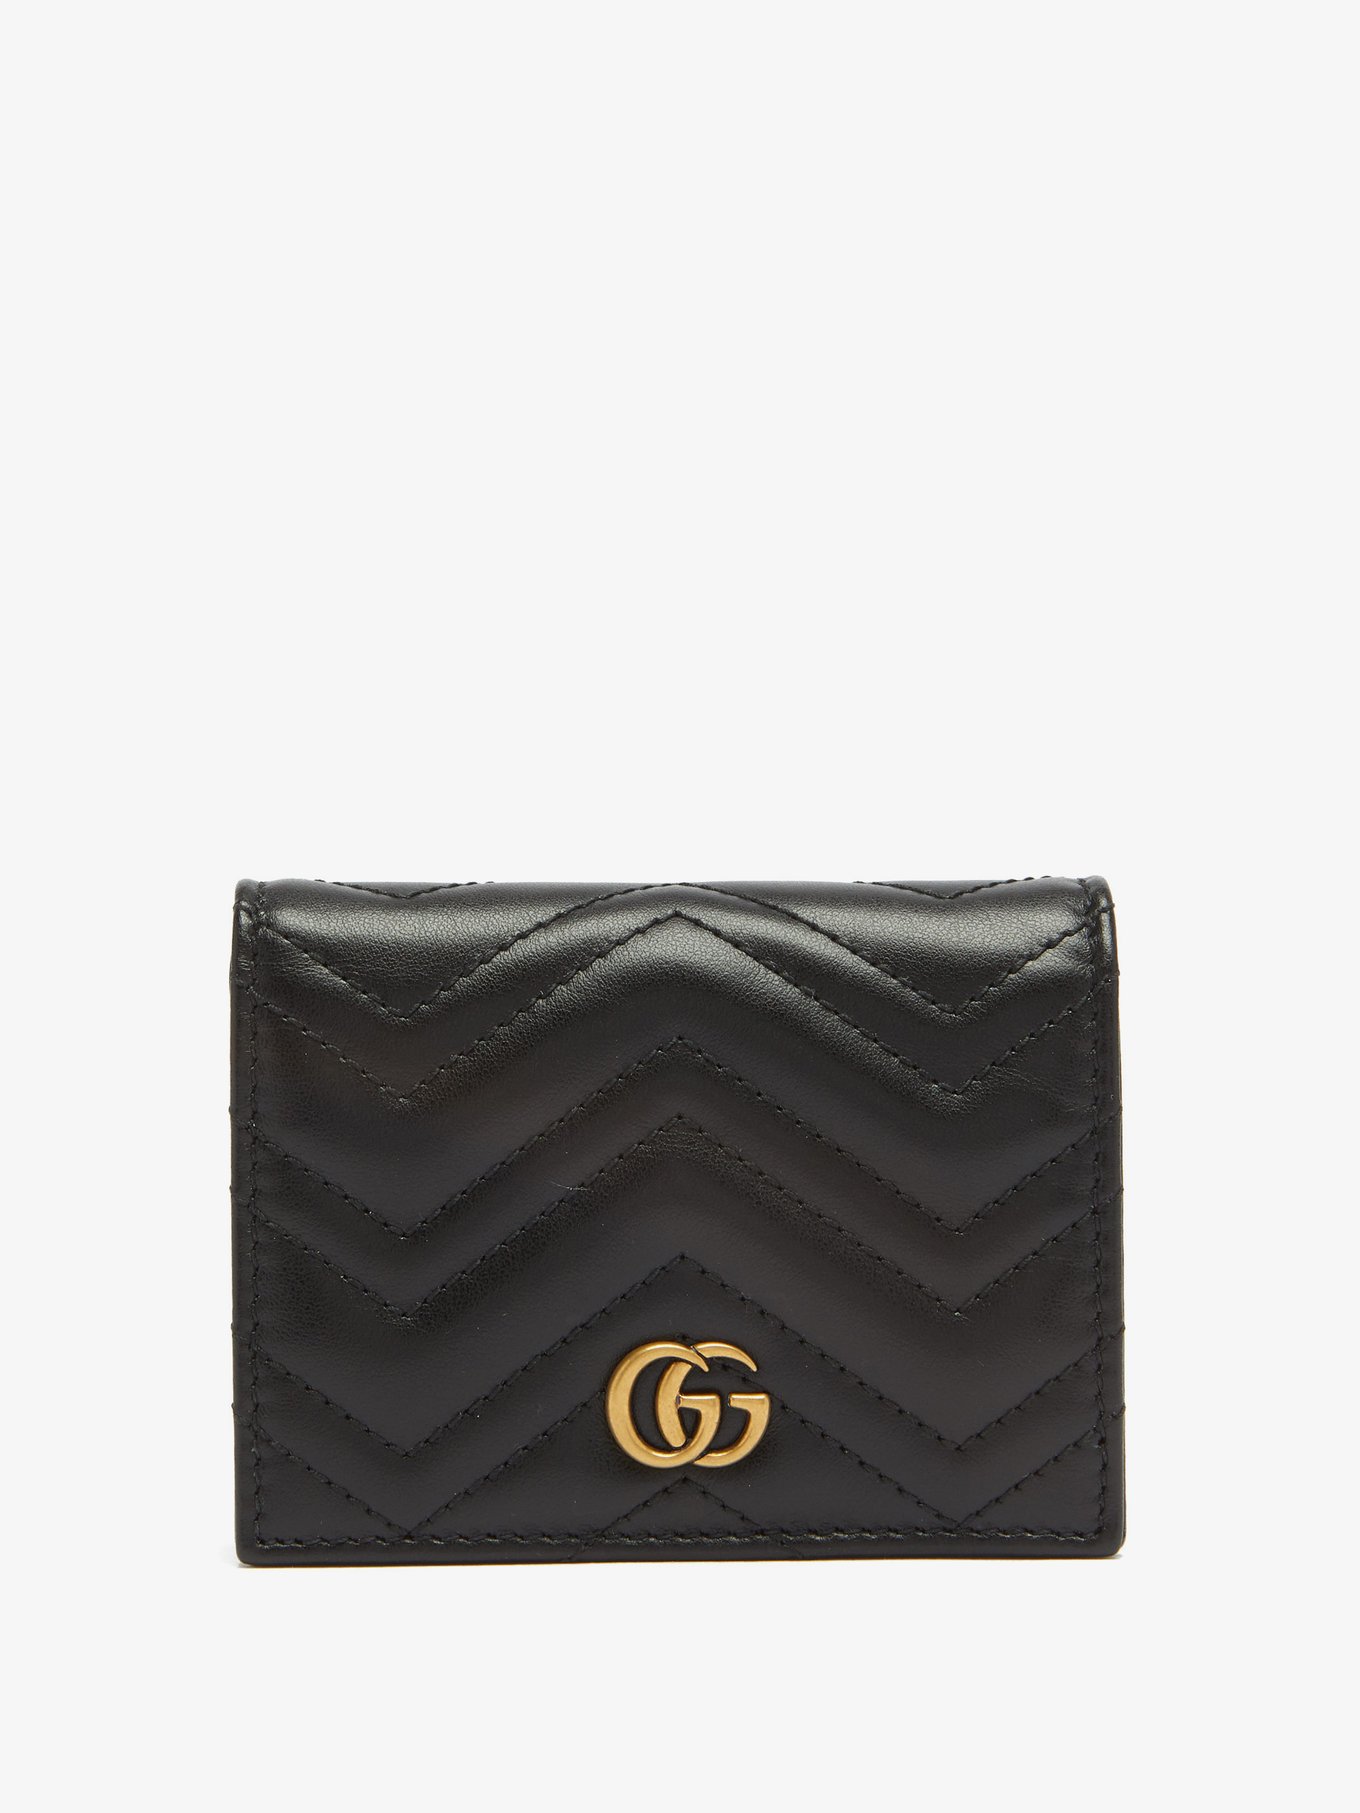 GG Marmont quilted leather wallet